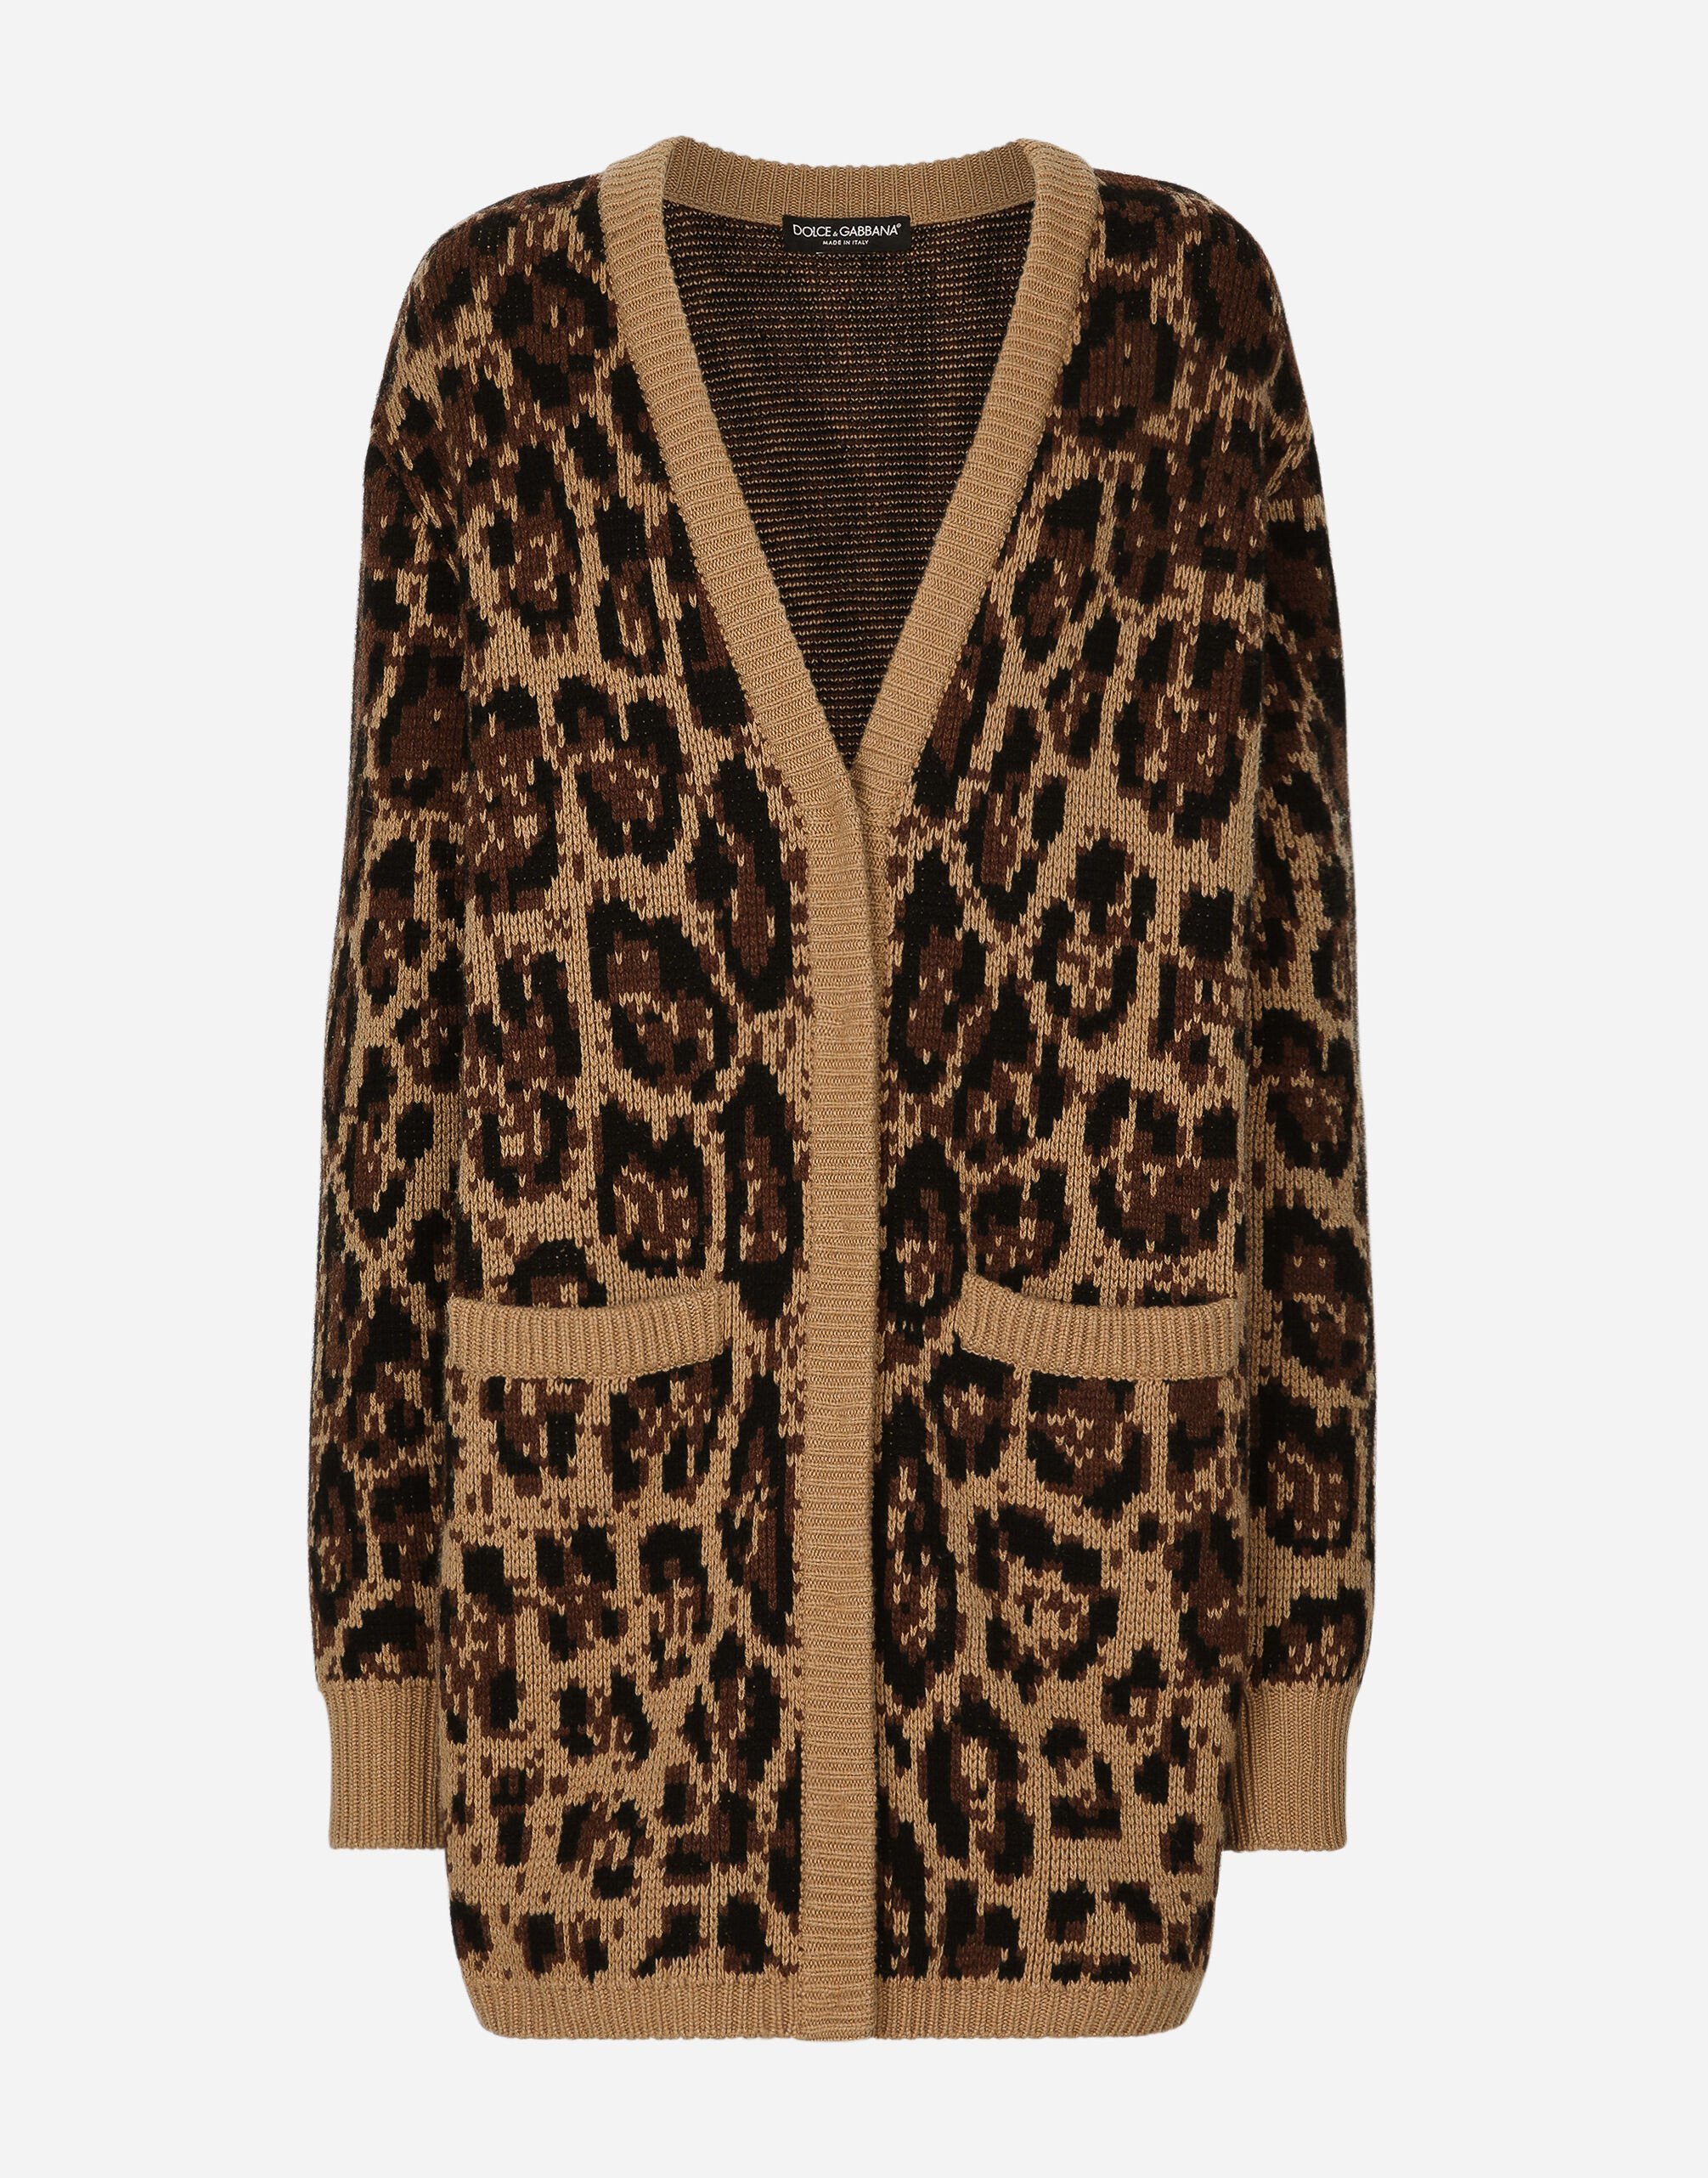 Dolce & Gabbana Long wool and cashmere cardigan with jacquard leopard design Multicolor FXI25TJBVX8